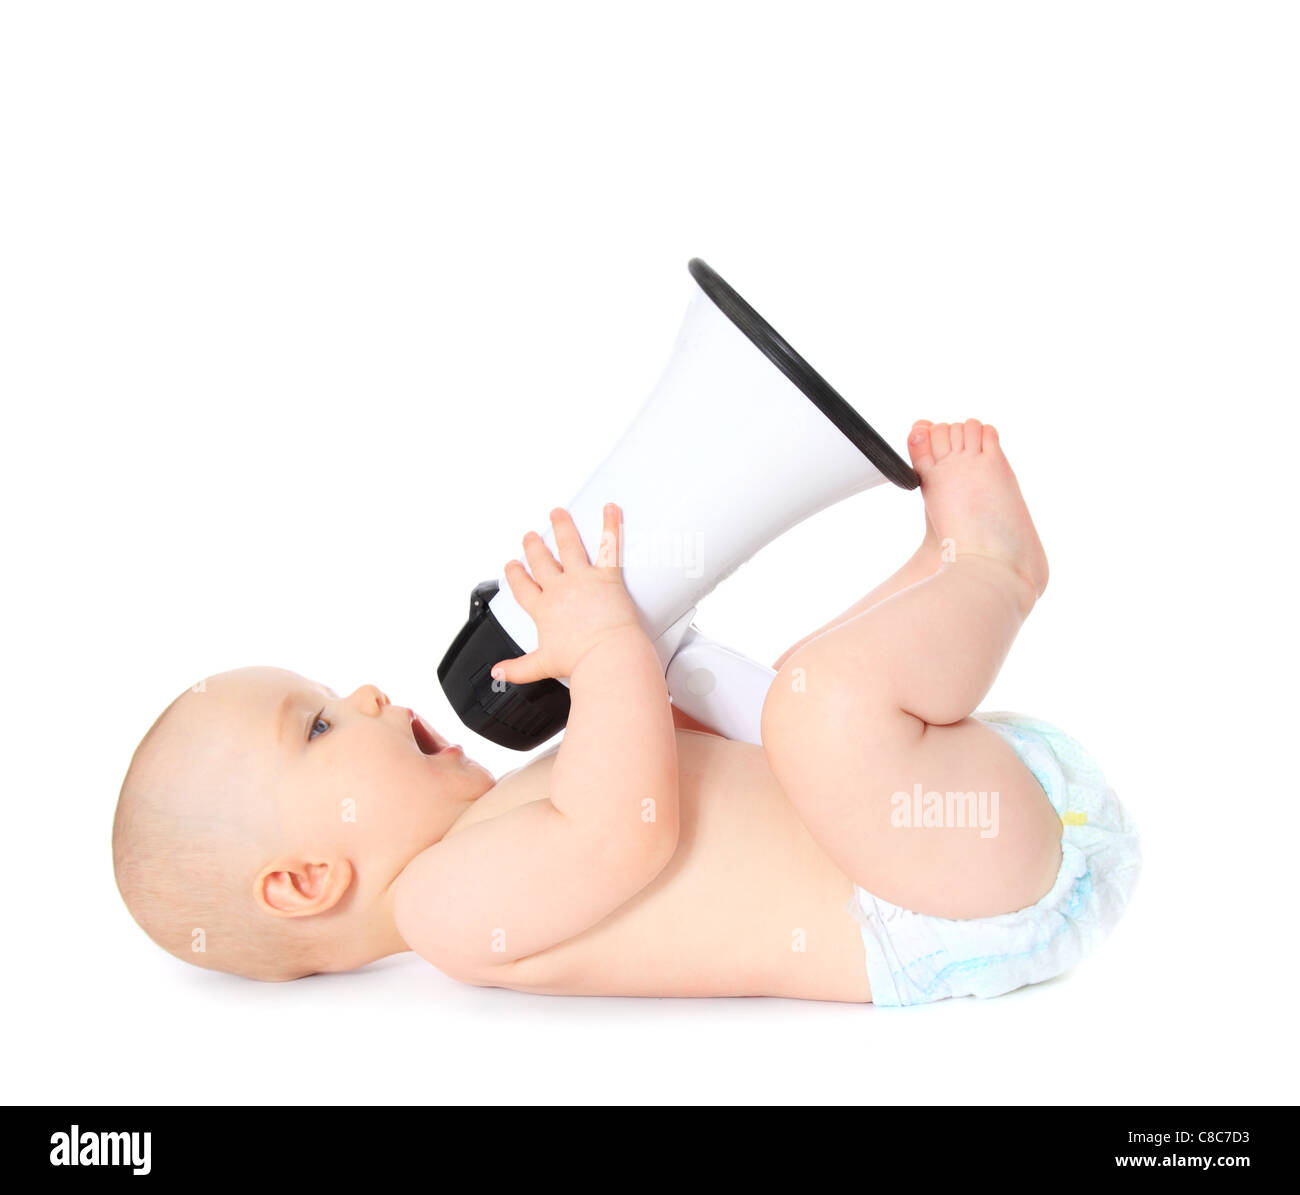 Cute baby playing with megaphone. All on white background. Stock Photo